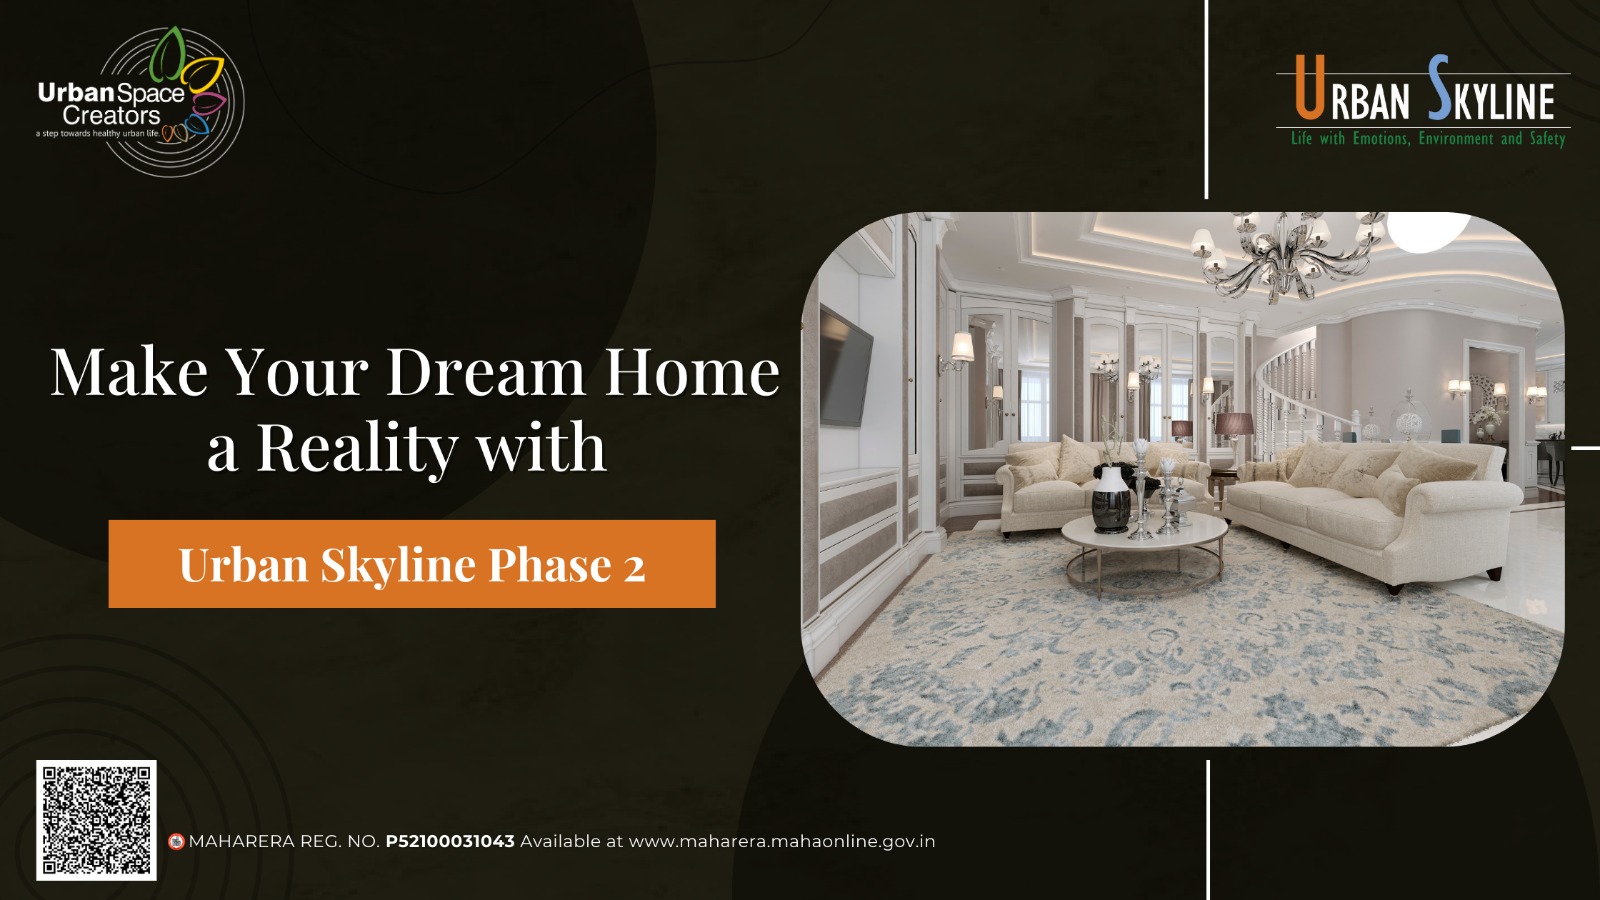 Make Your Dream Home a Reality with Urban Skyline Phase 2